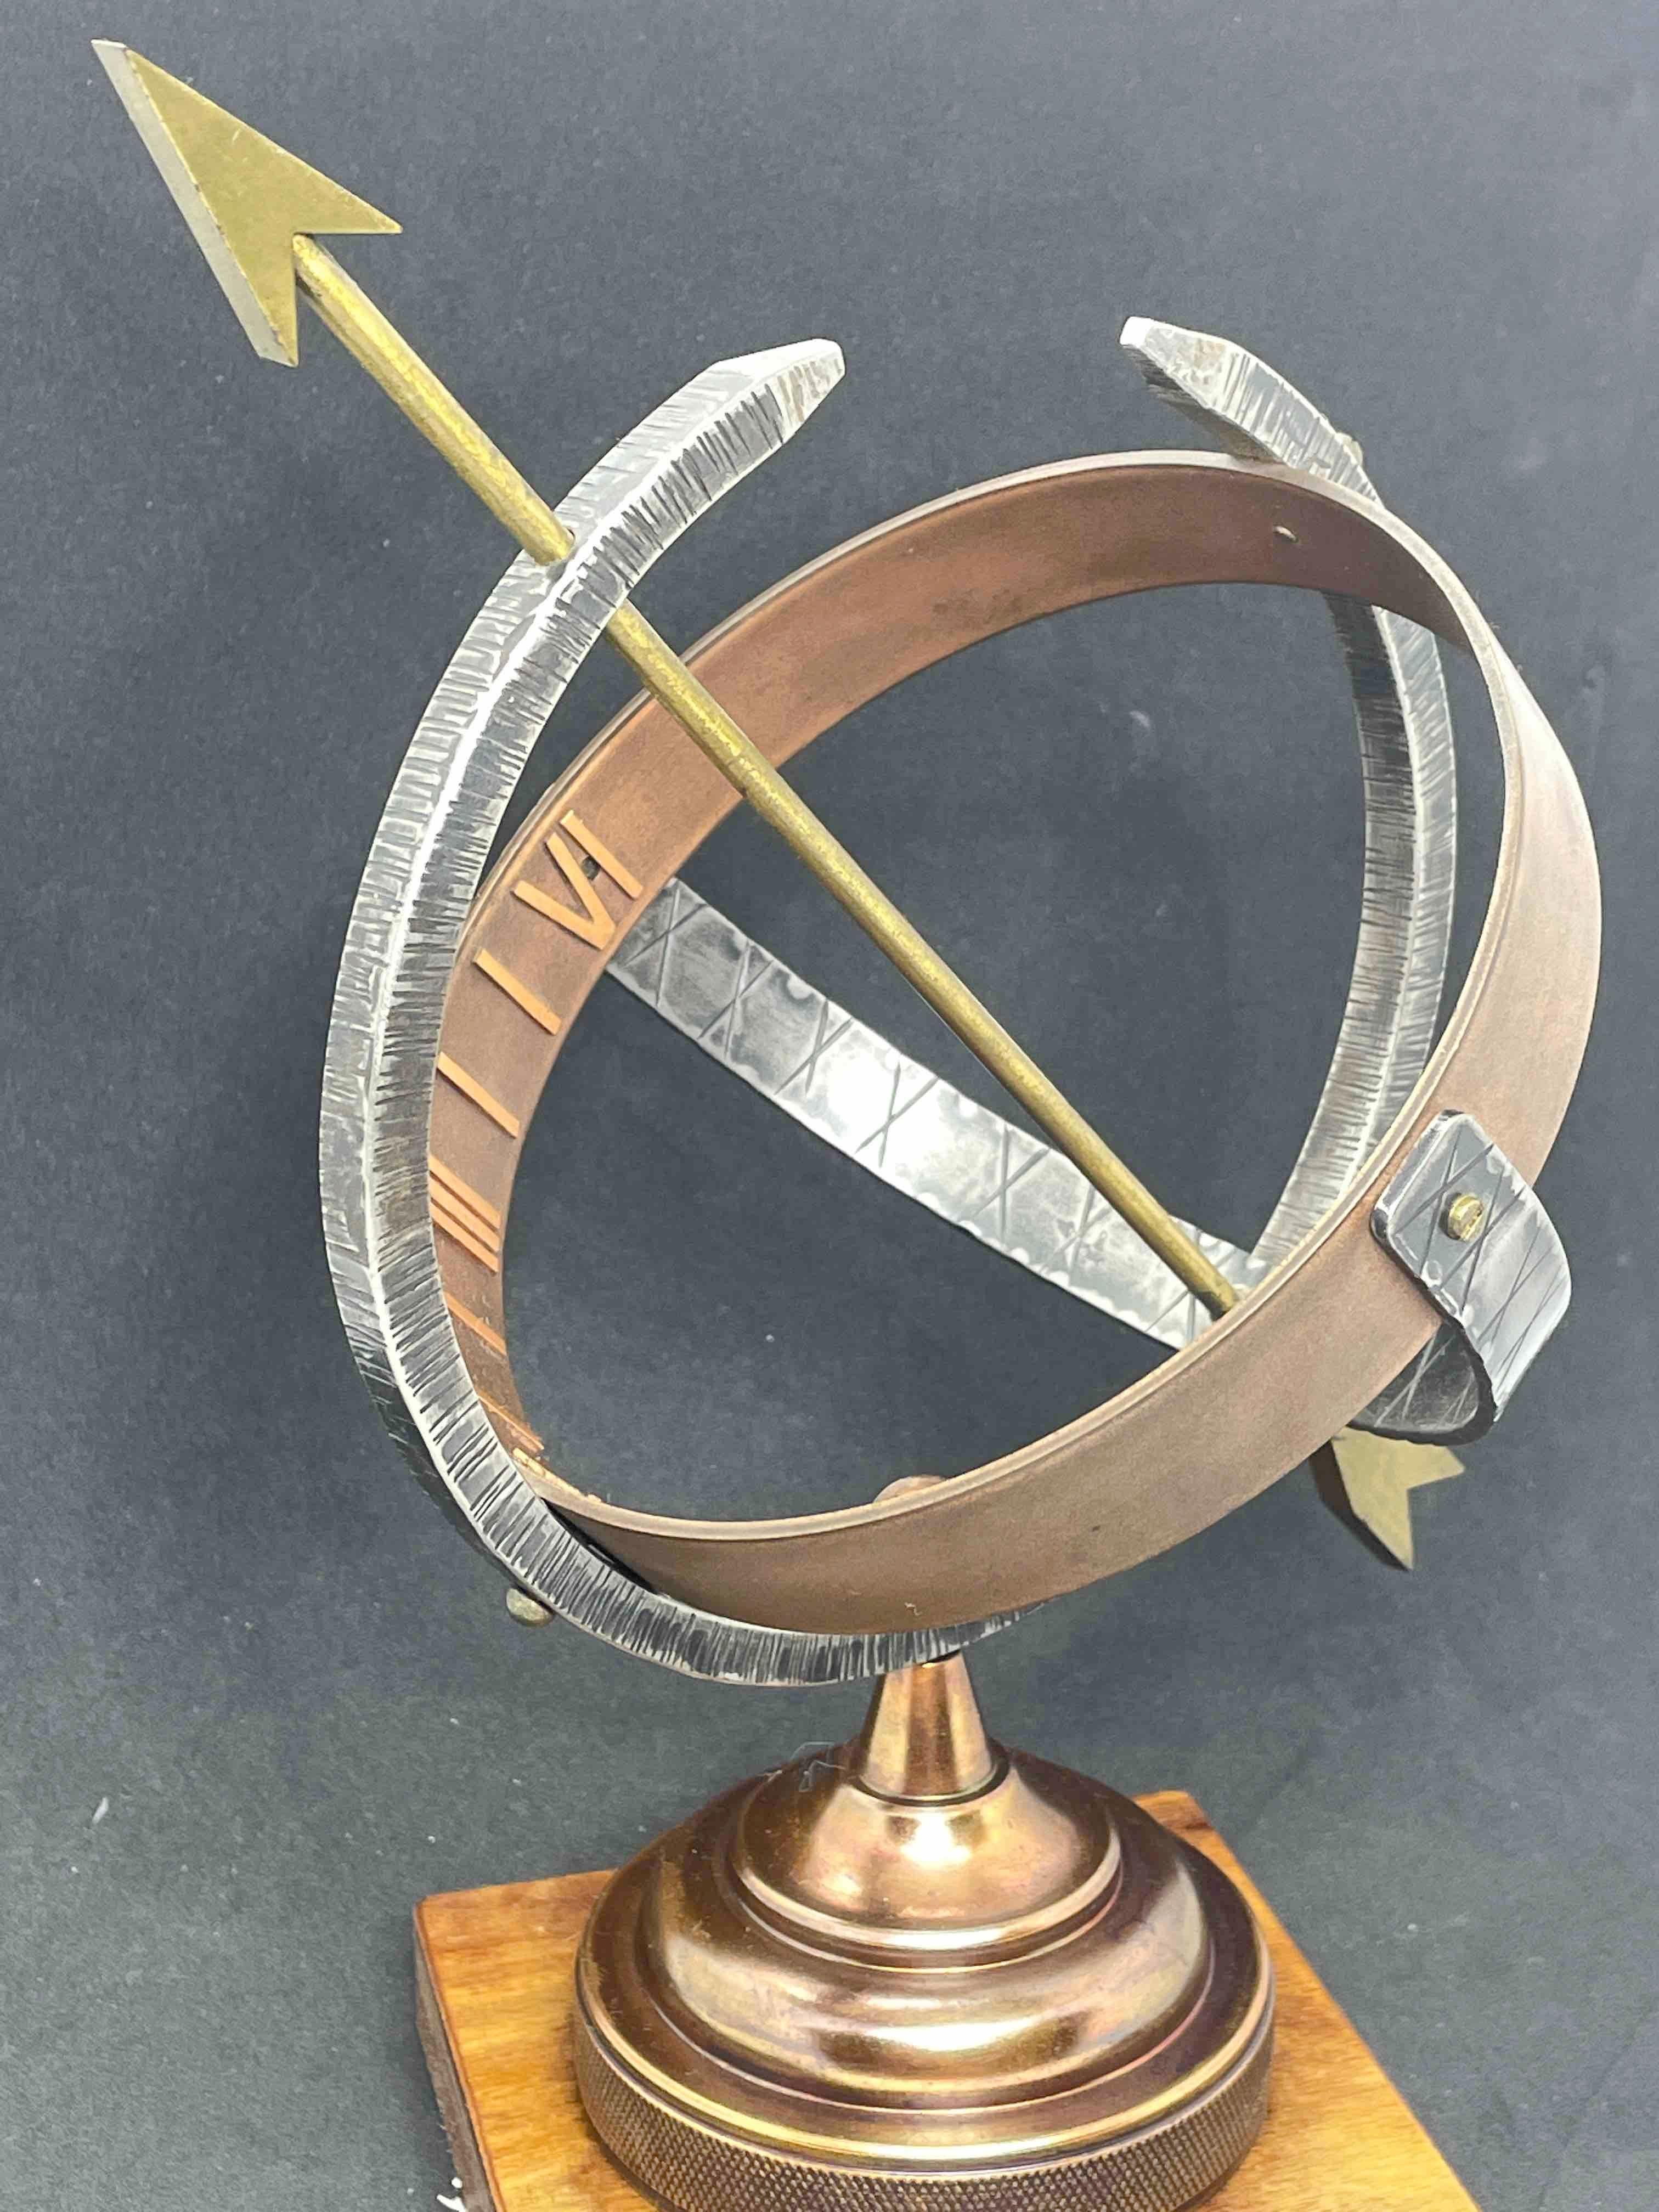 Hand-Crafted Vintage Brass & Copper Sun Clock Armillary Sun Dial on Wooden Base, German 1960s For Sale